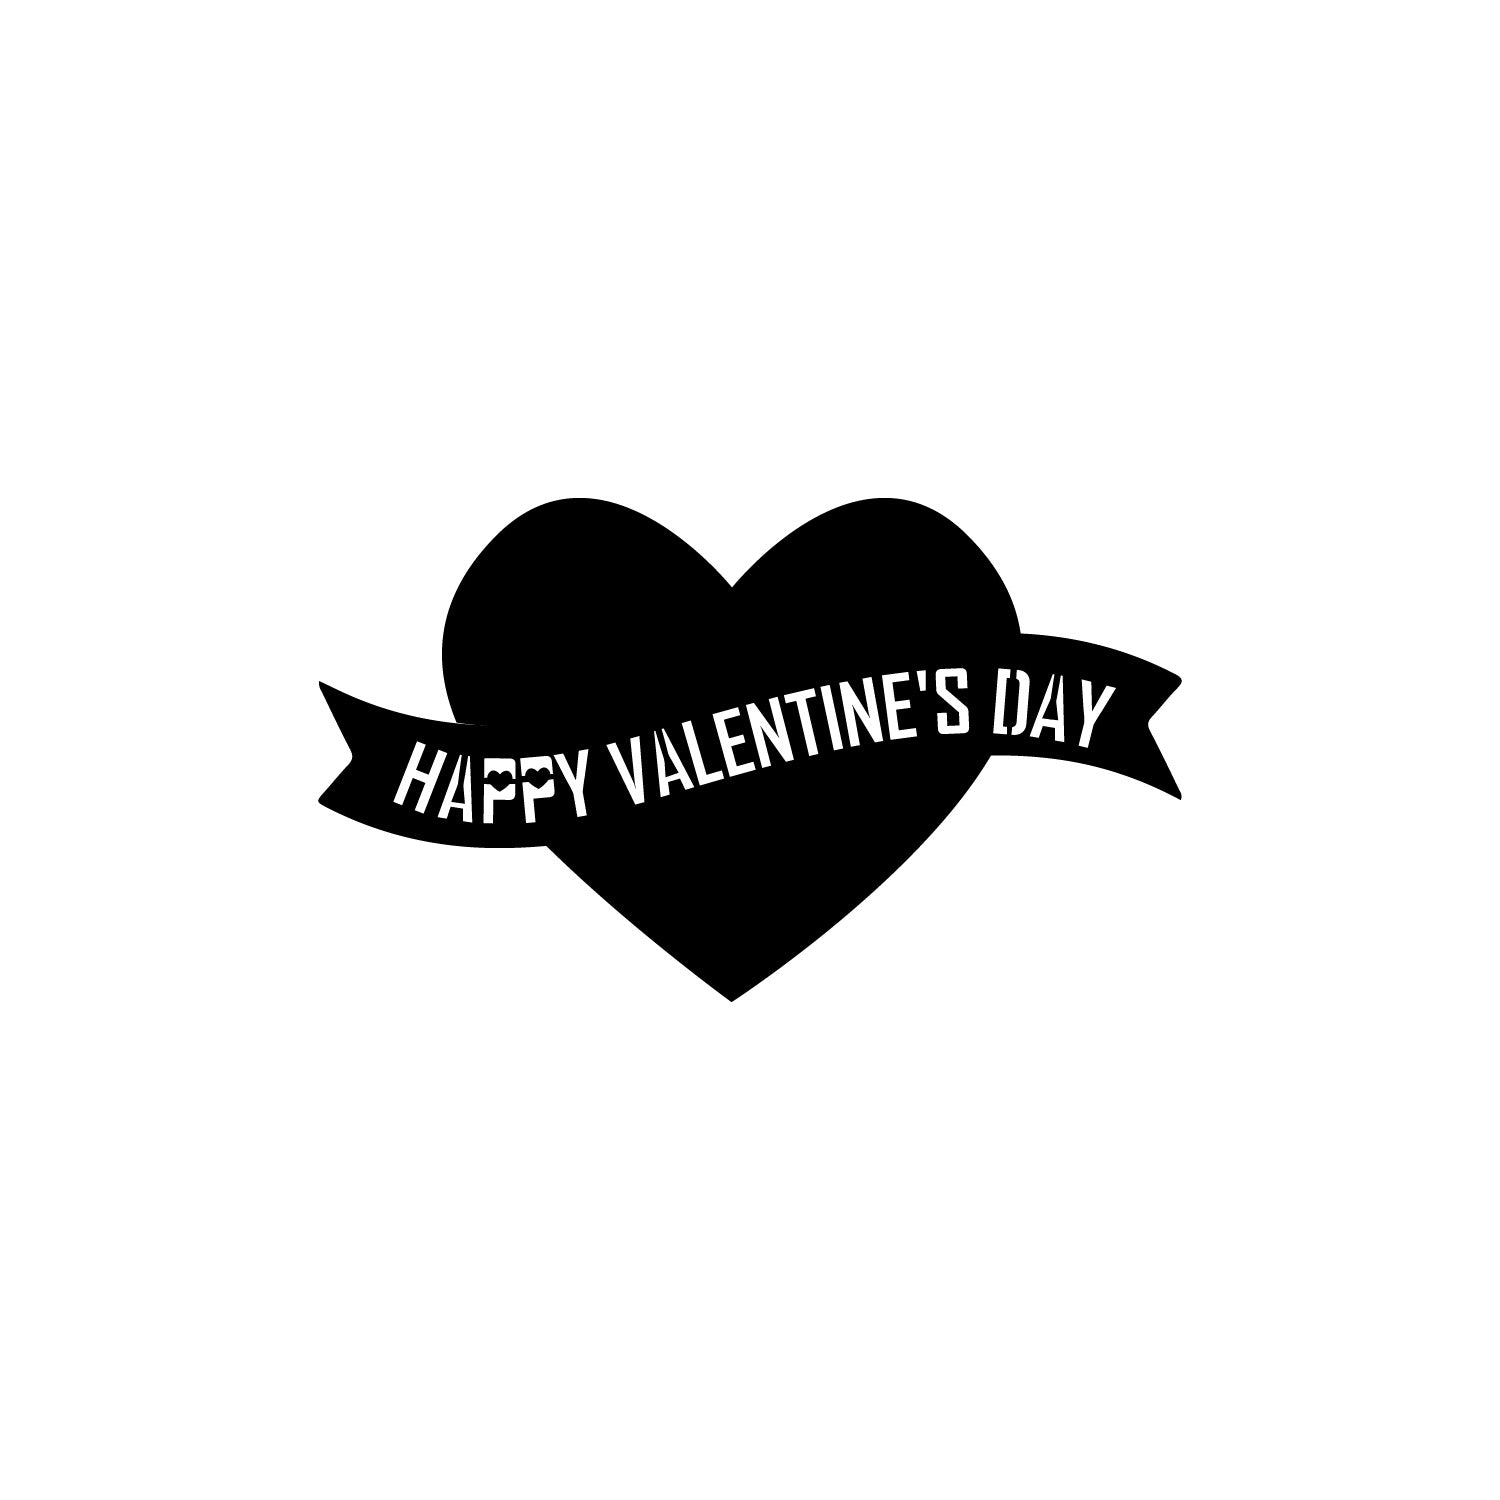 "Happy Valentine's Day" Black Engineered Wood Wall Art Cutout, Ready to Hang Home Decor 2